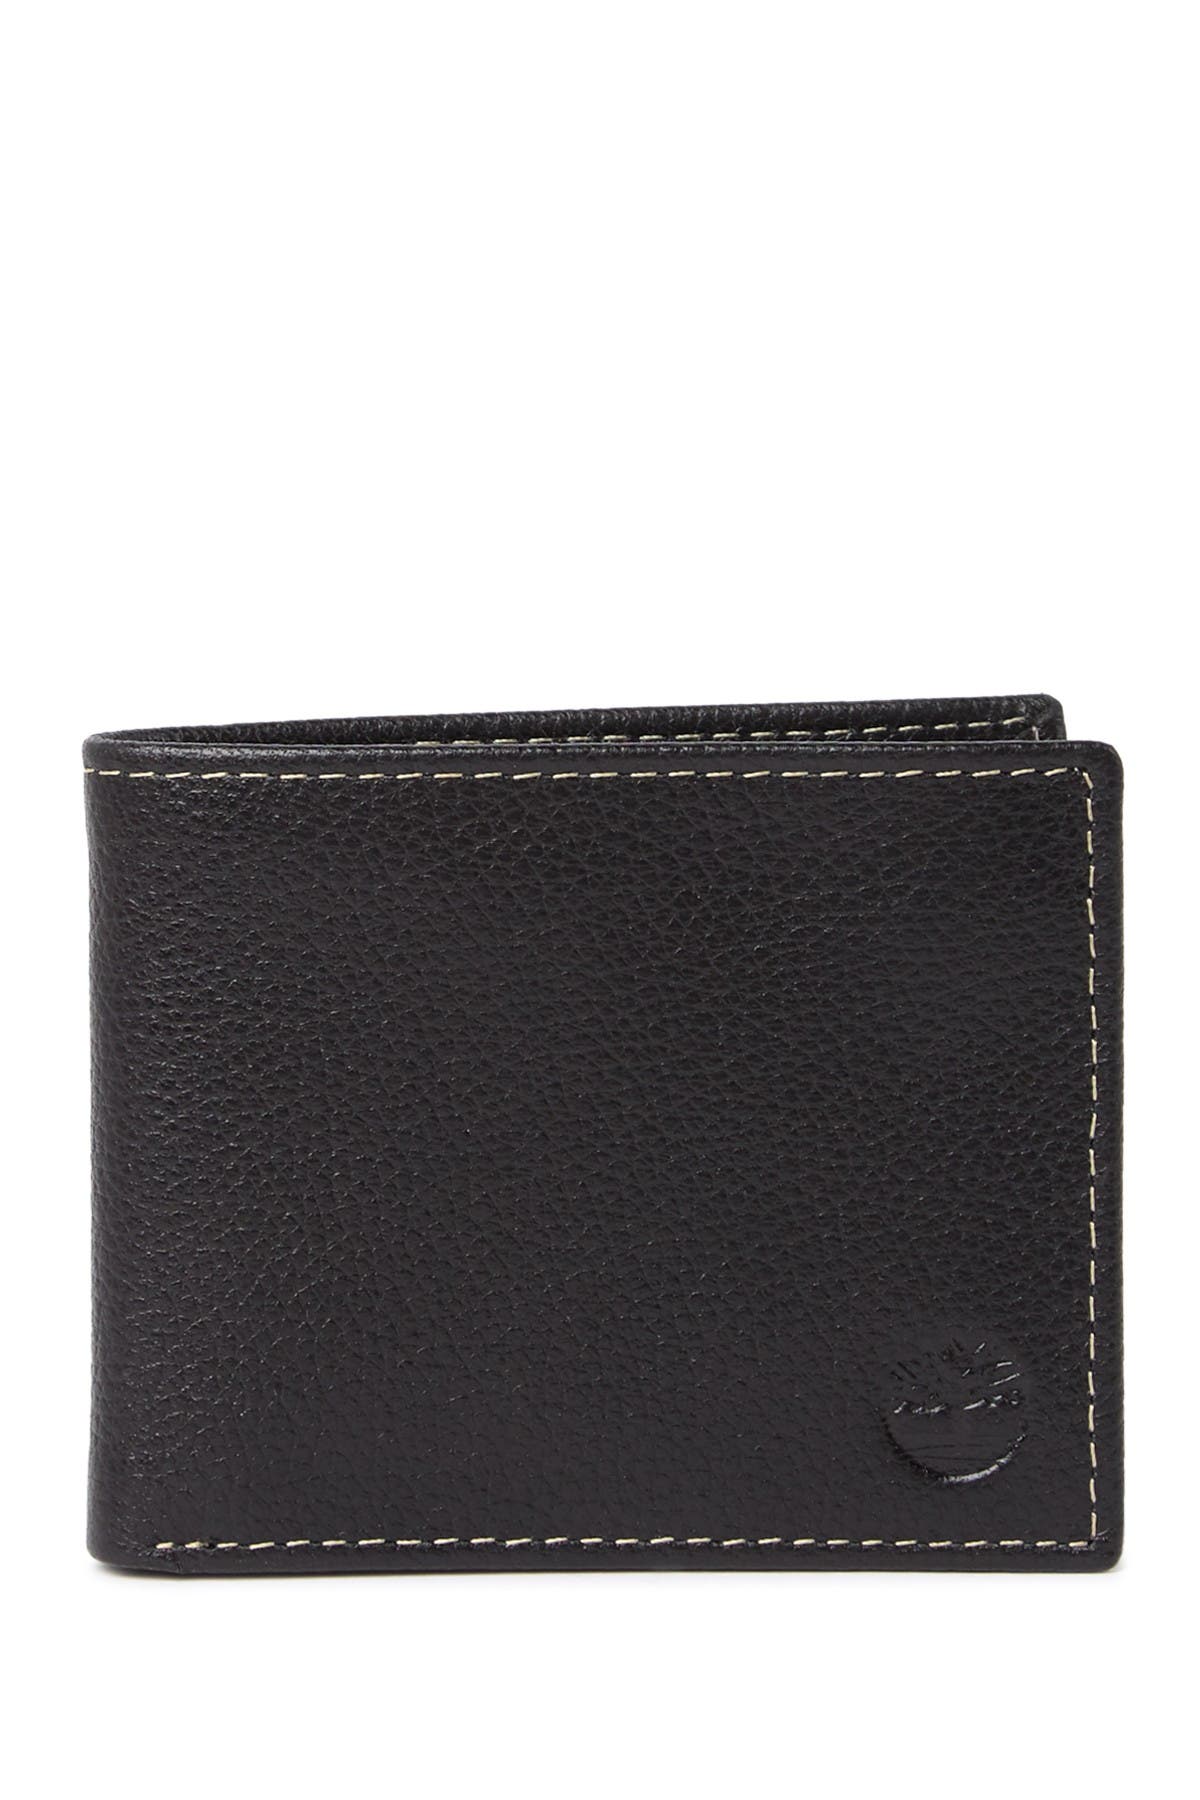 Timberland | Core Sportz Leather Wallet 